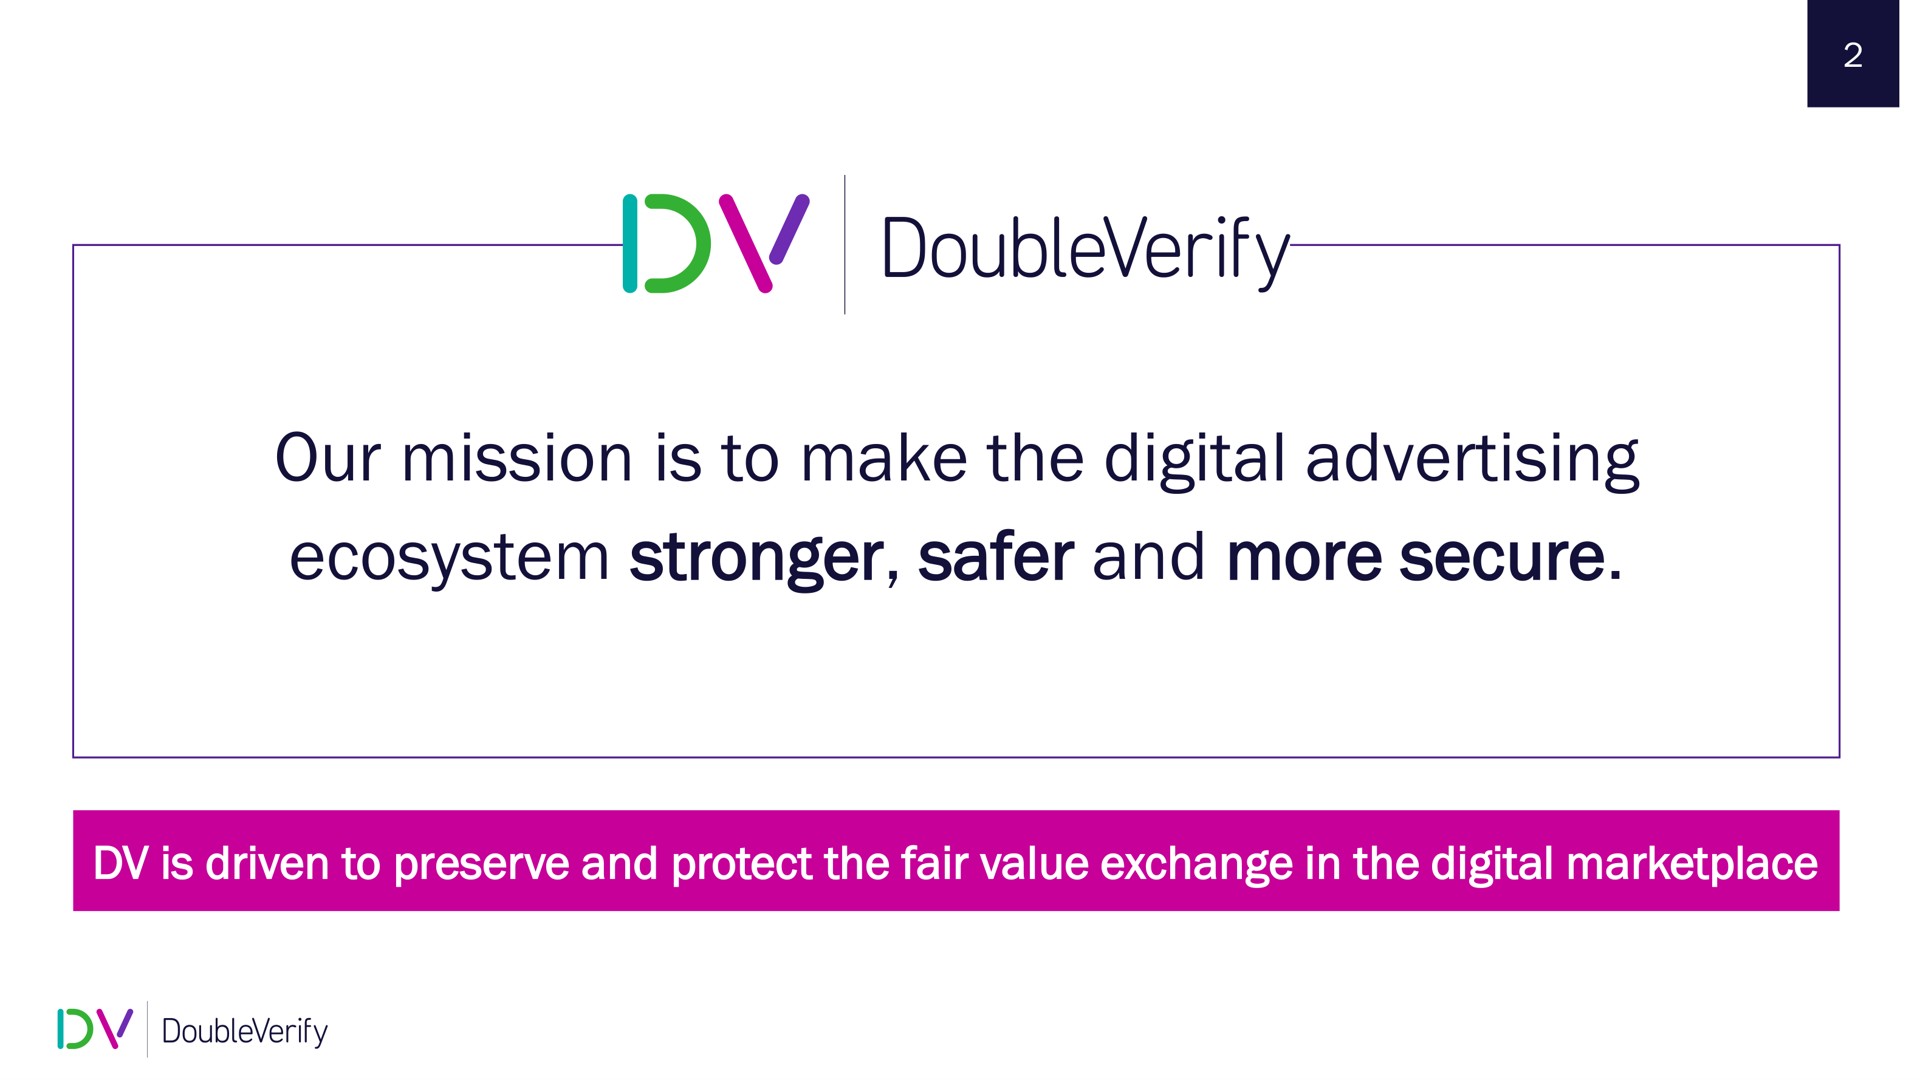 our mission is to make the digital advertising ecosystem and more secure | DoubleVerify